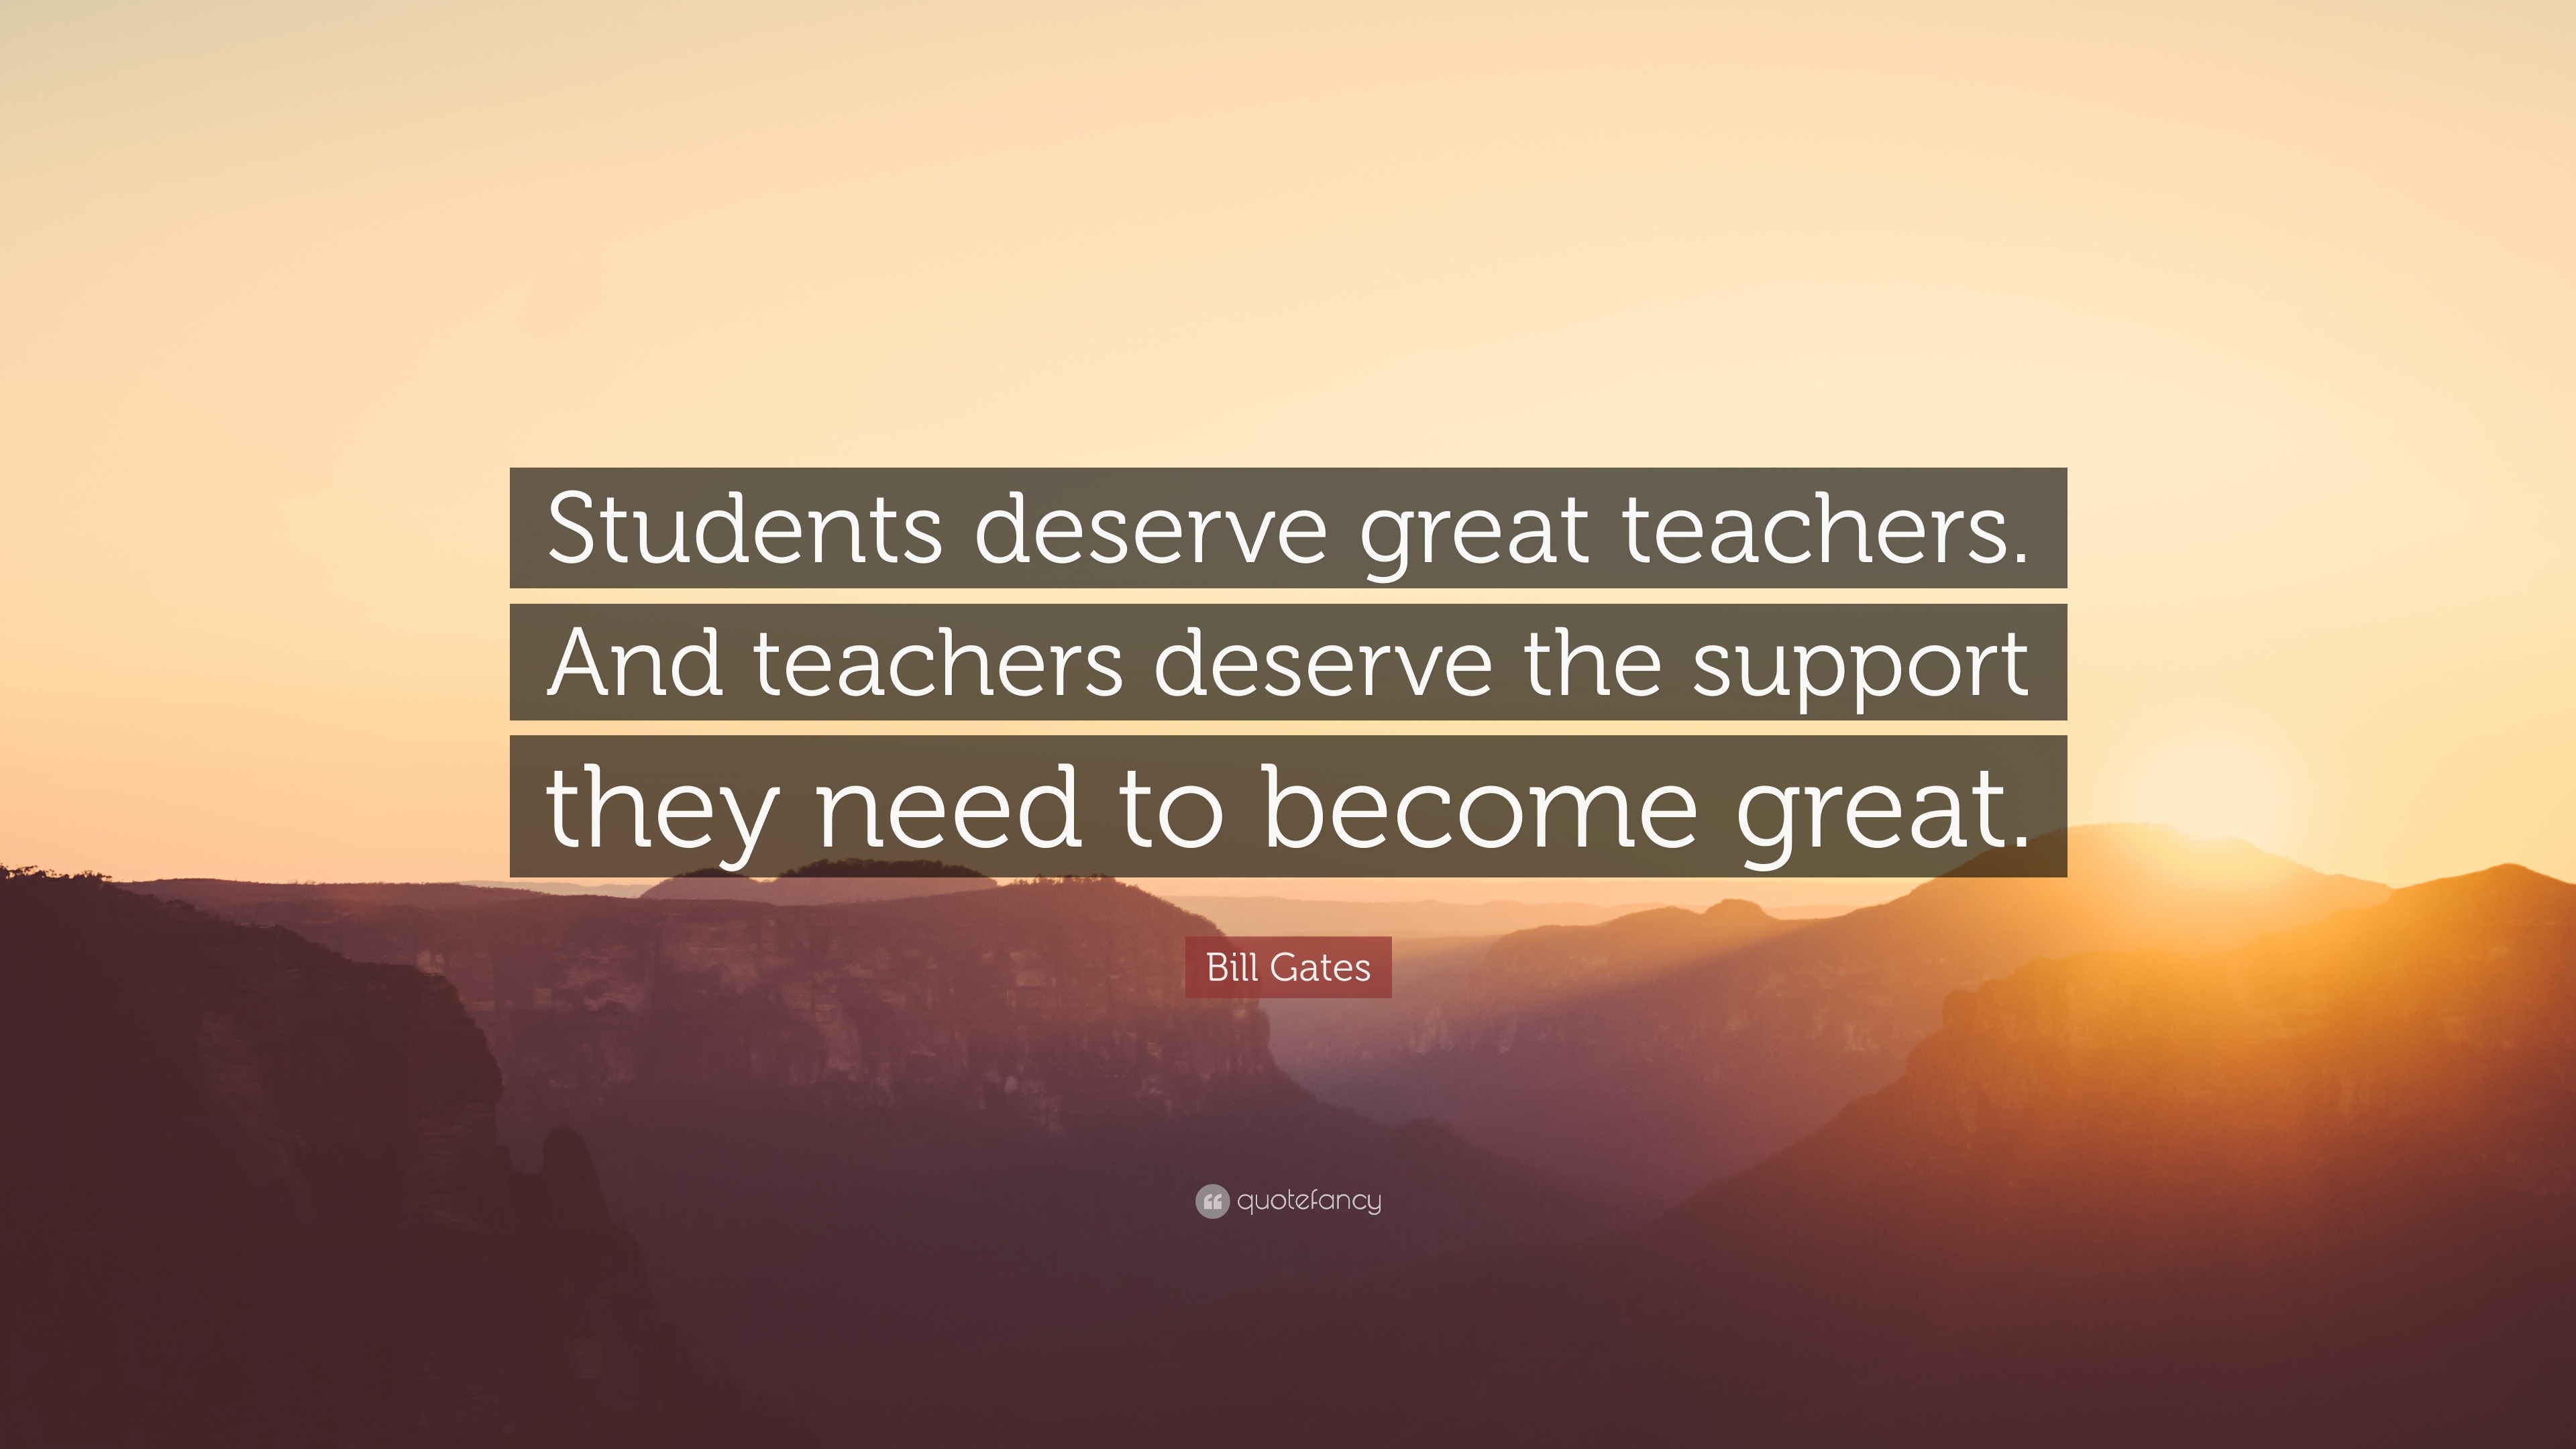 Bill Gates Quote: “Students deserve great teachers. And teachers ...